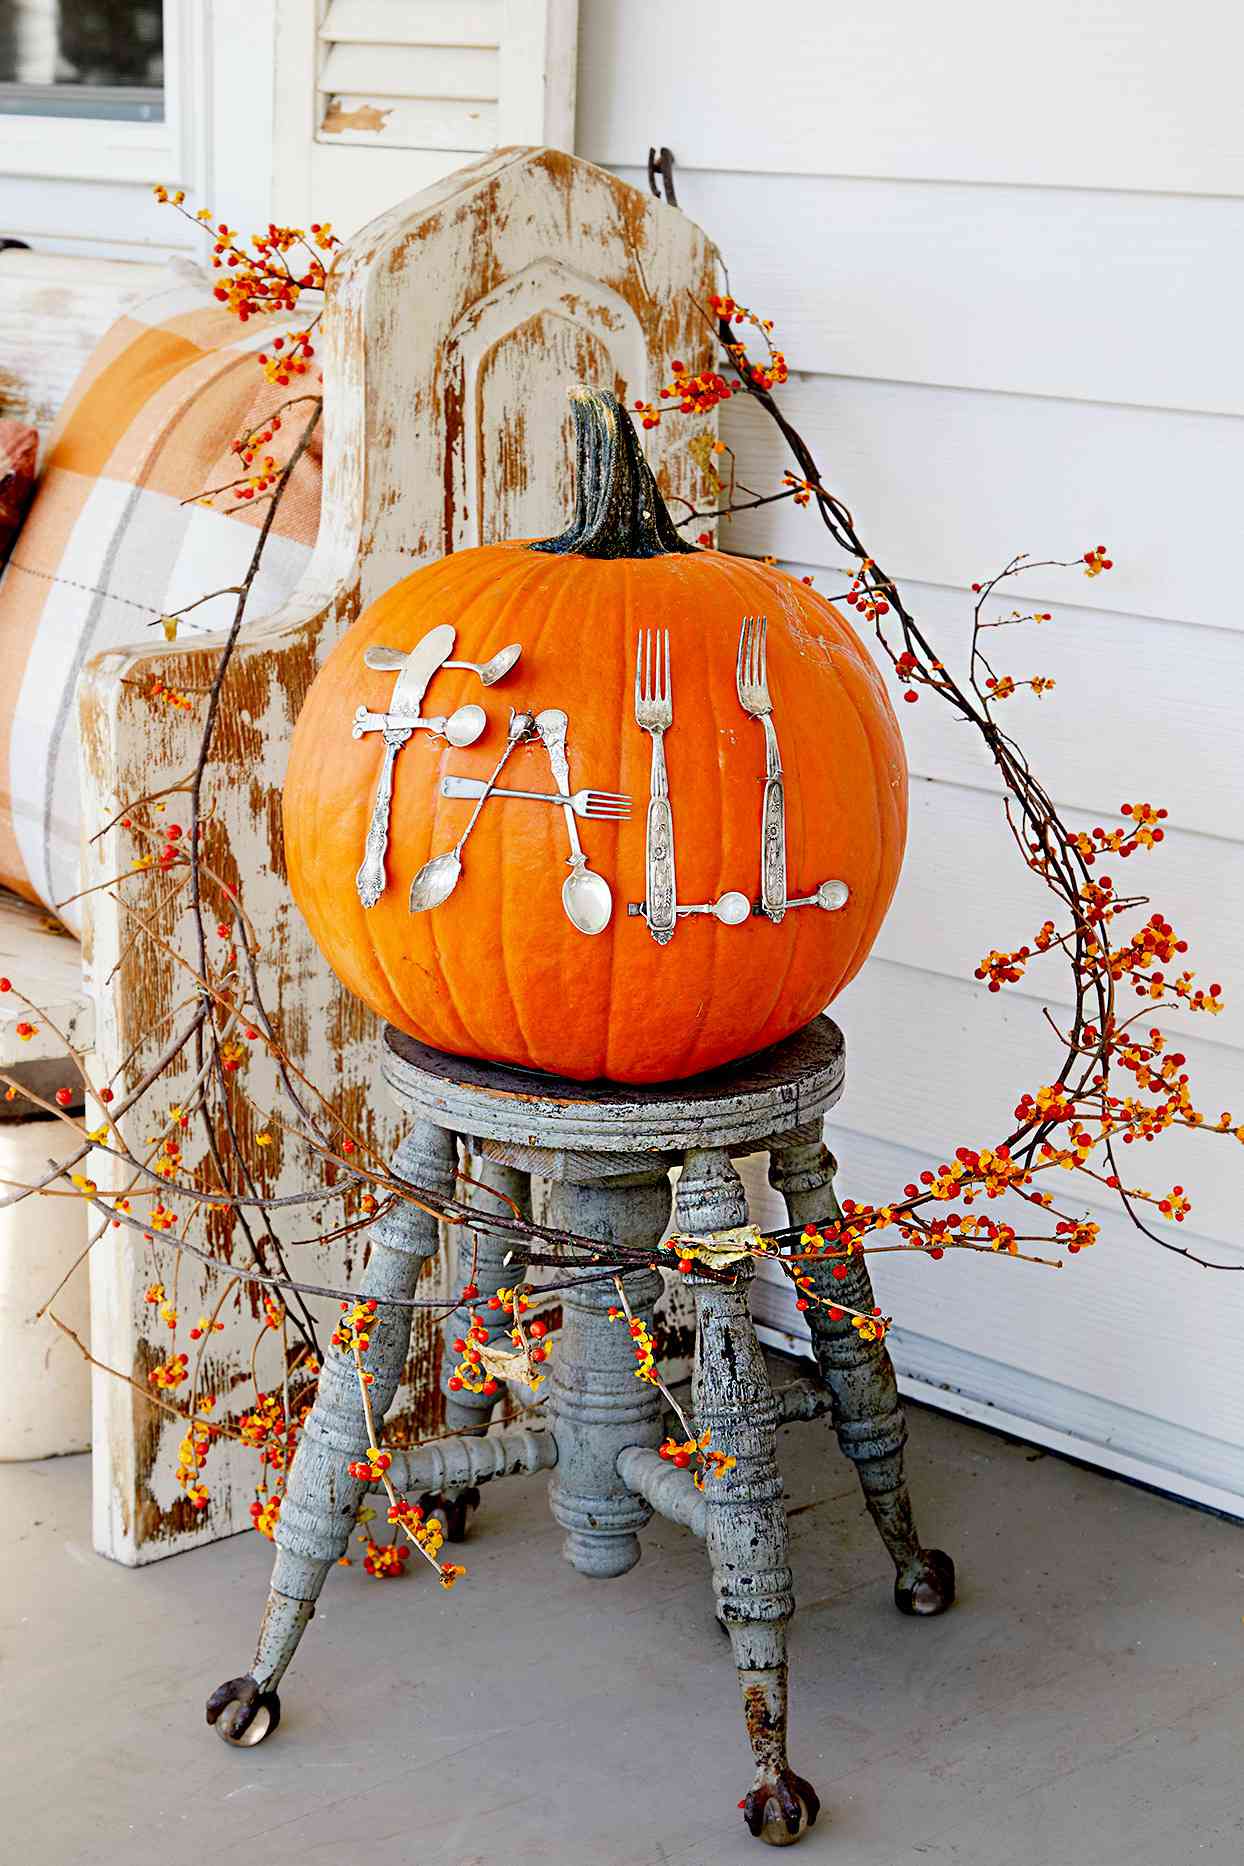 Pumpkin with "Fall" spelled with silverware